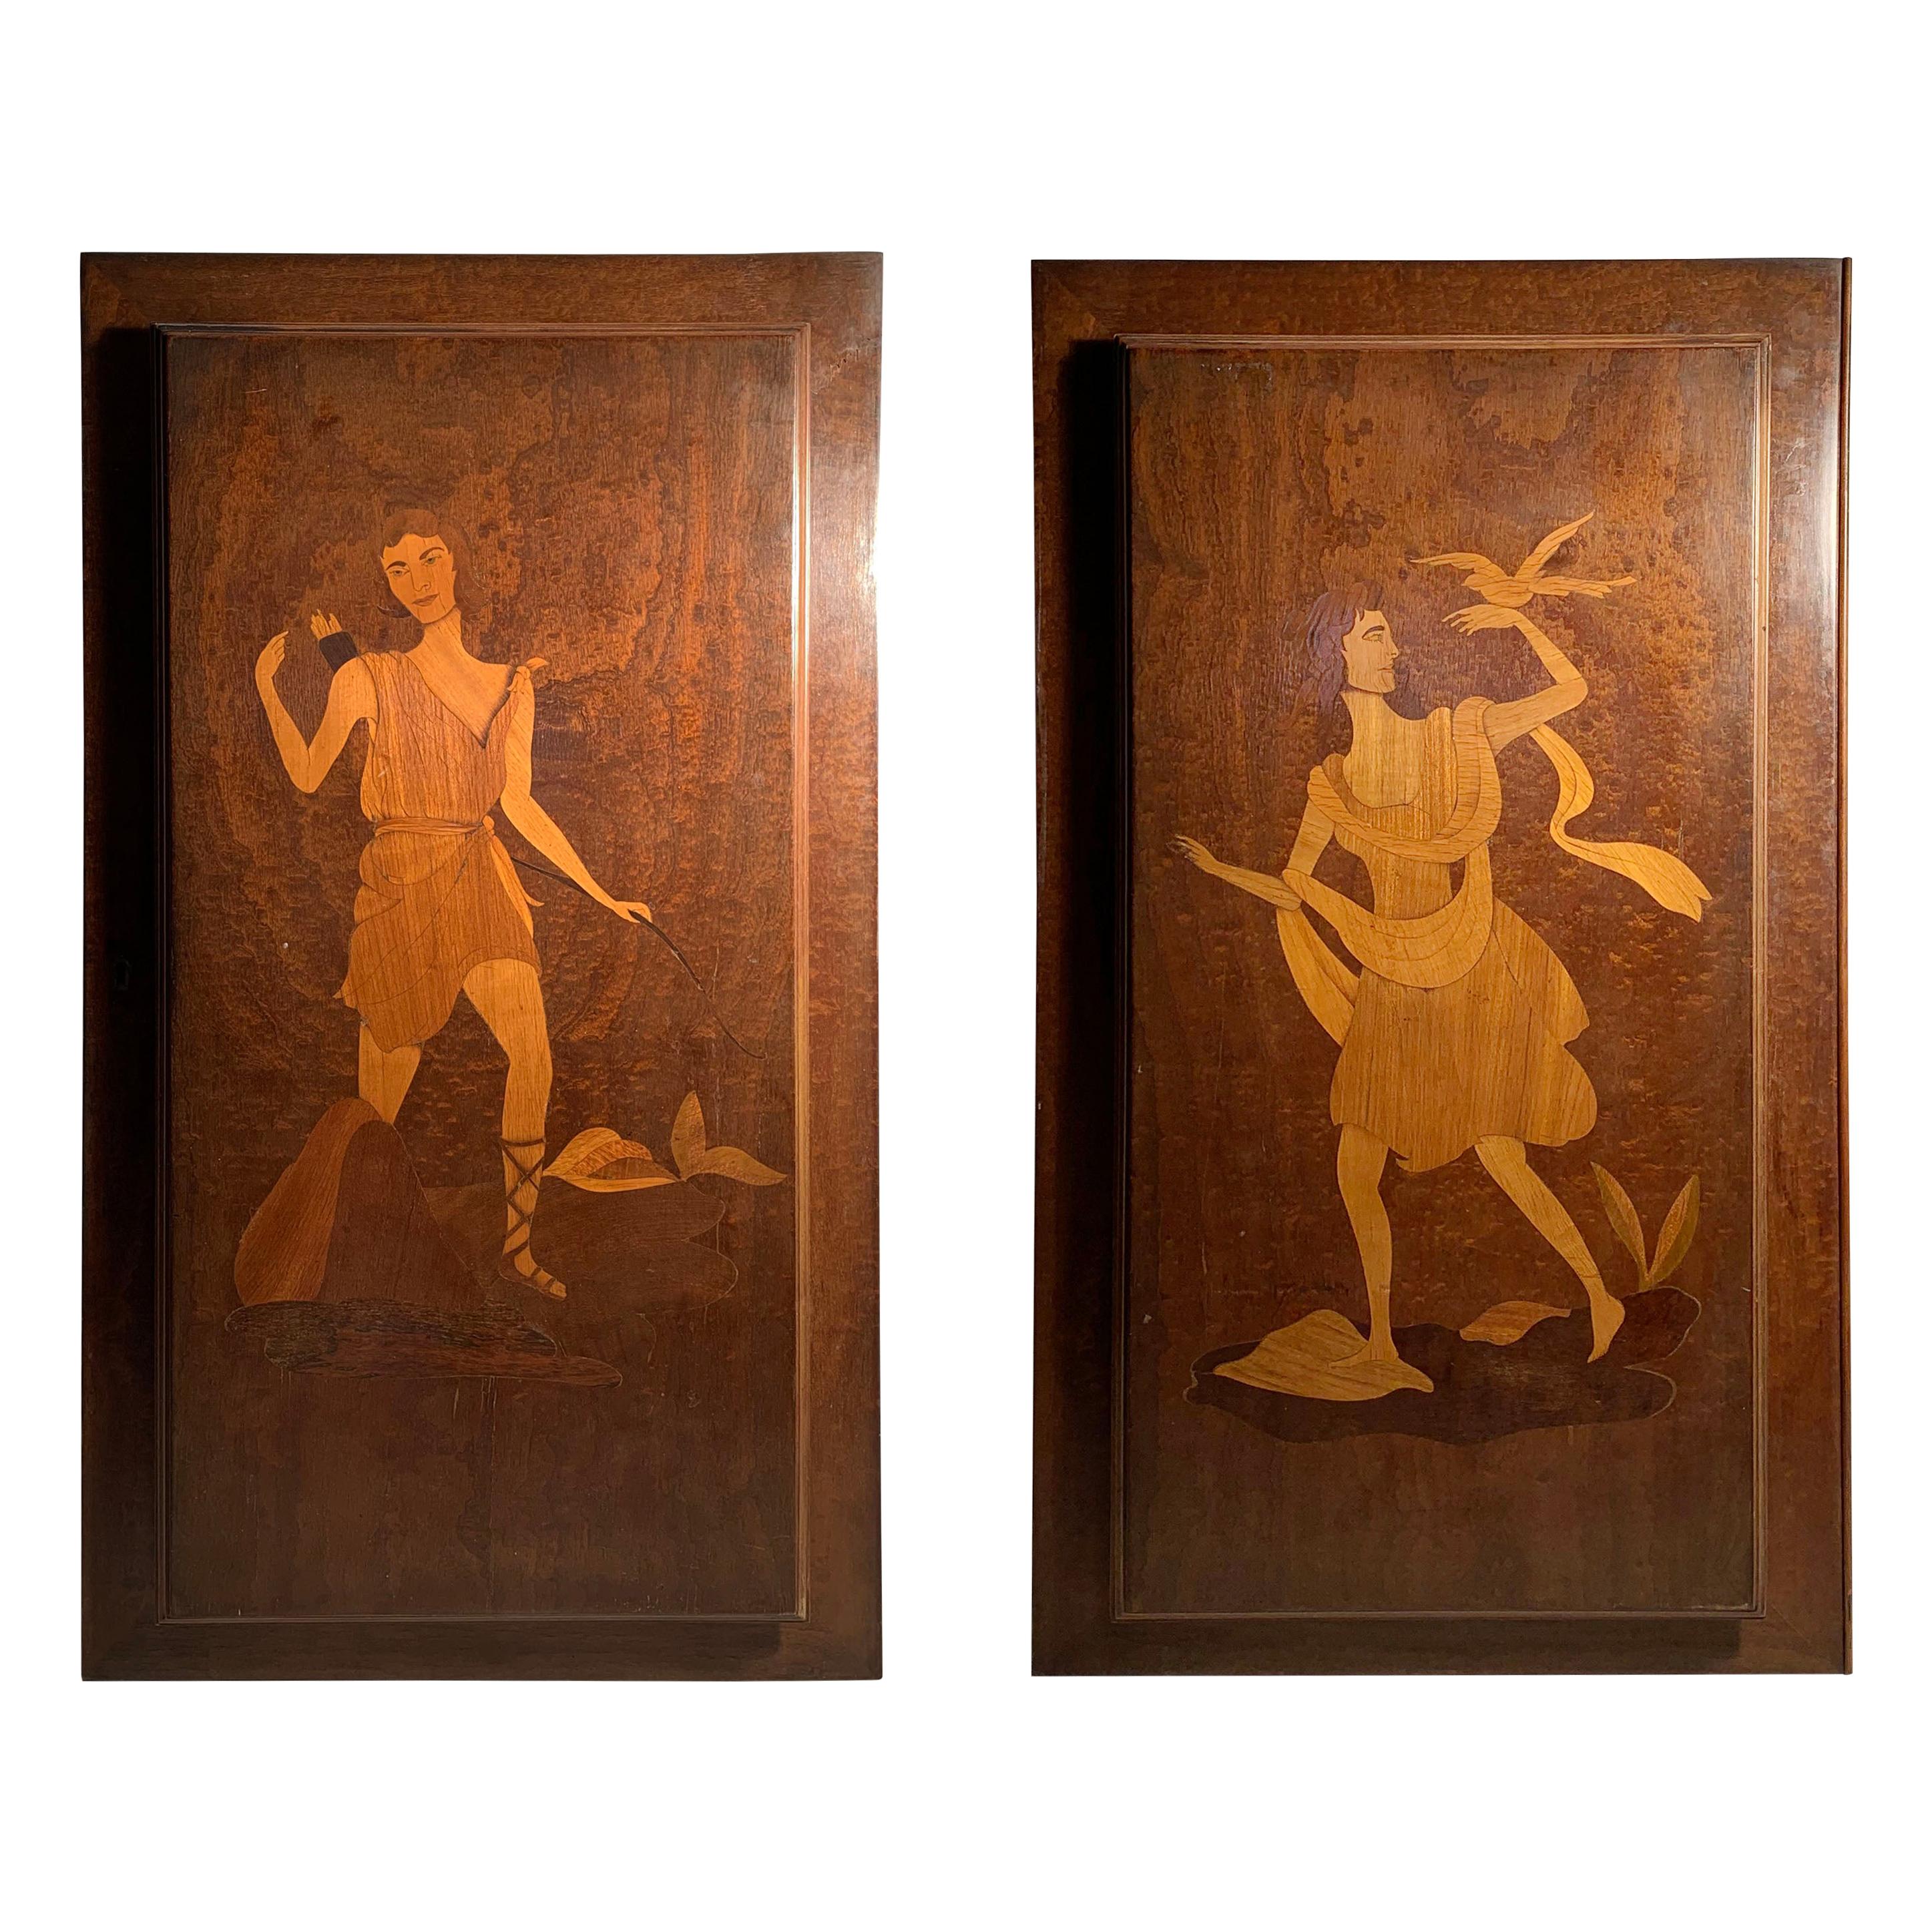 Large Eugenio Diez Illuminated Marquetry Wall Hangings or Cabinet Doors